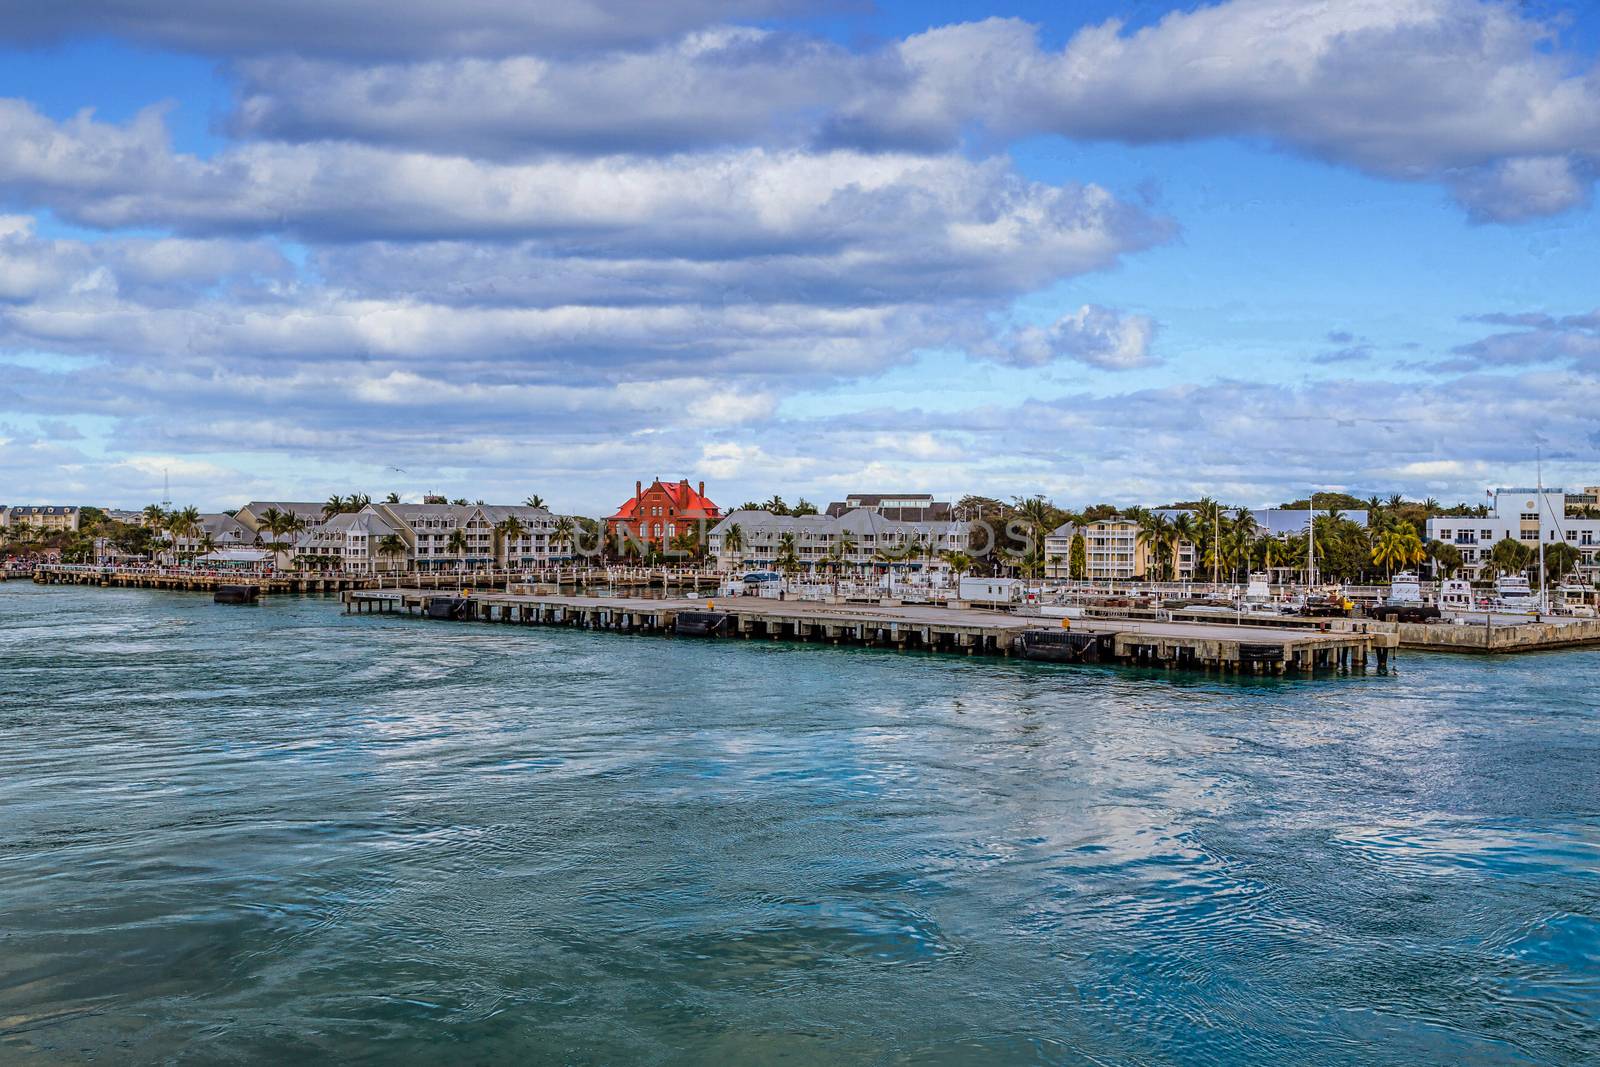 Pier of Key West from Sea by dbvirago